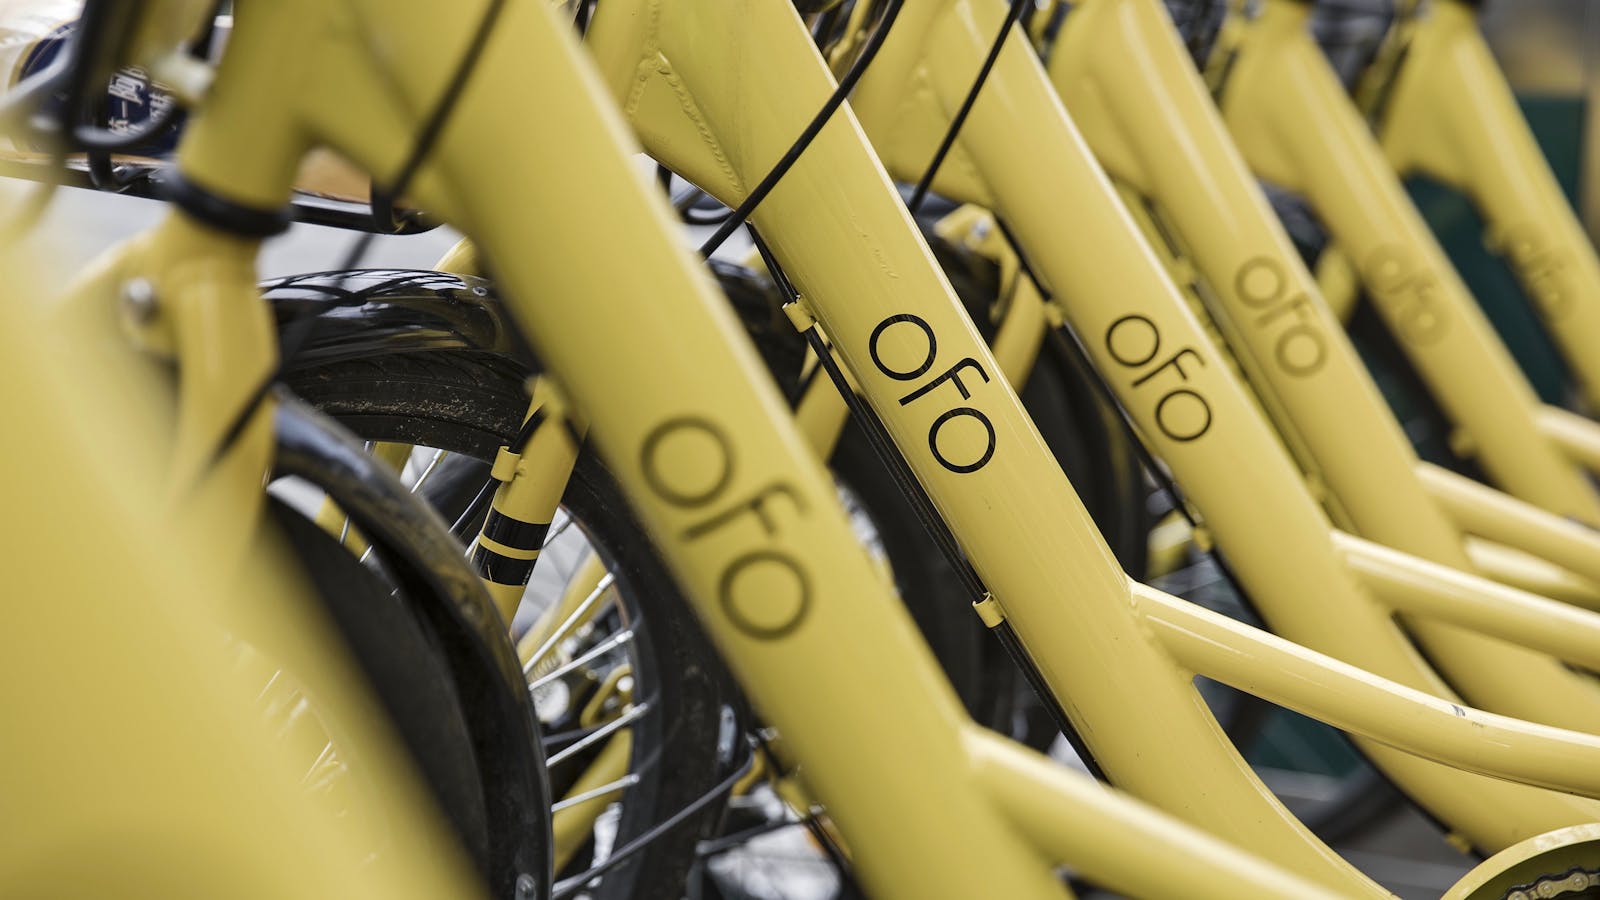 Ofo bikes parked in Shanghai last year. Photo by Bloomberg.